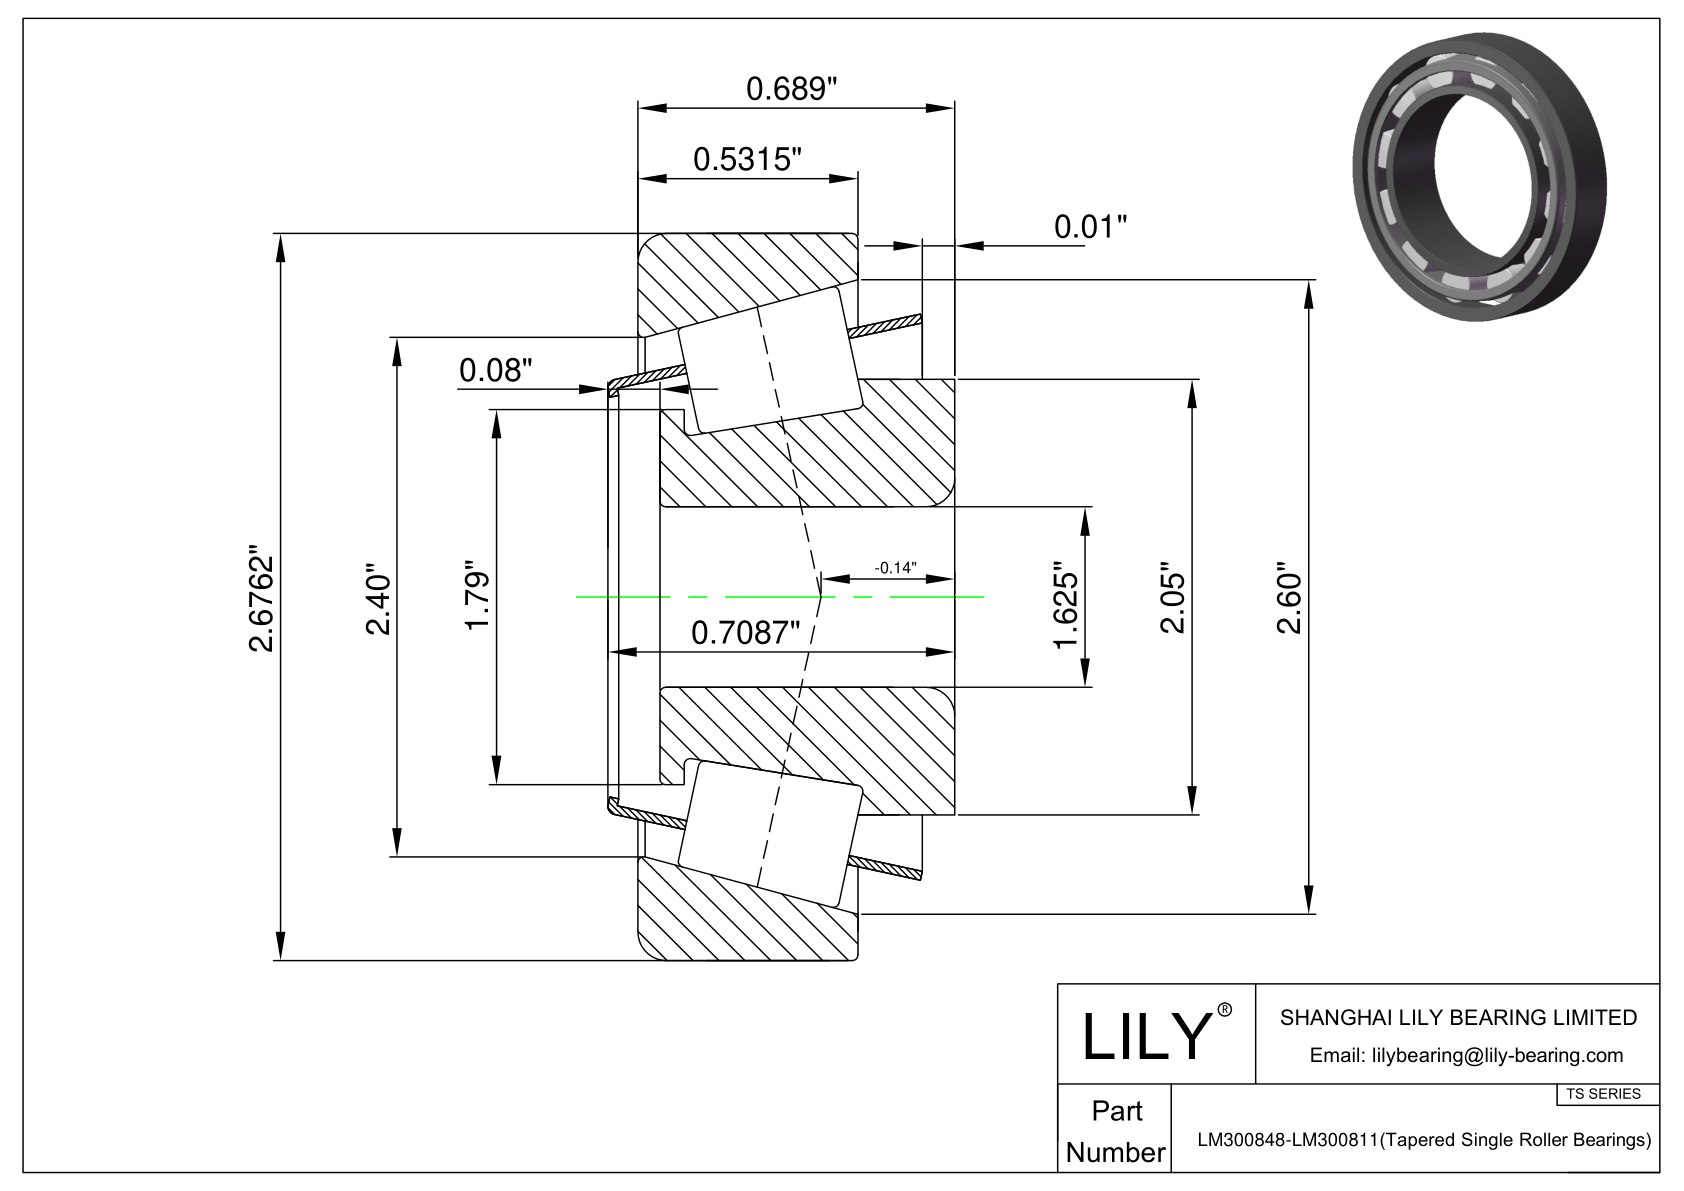 LM300848-LM300811 TS (Tapered Single Roller Bearings) (Imperial) cad drawing